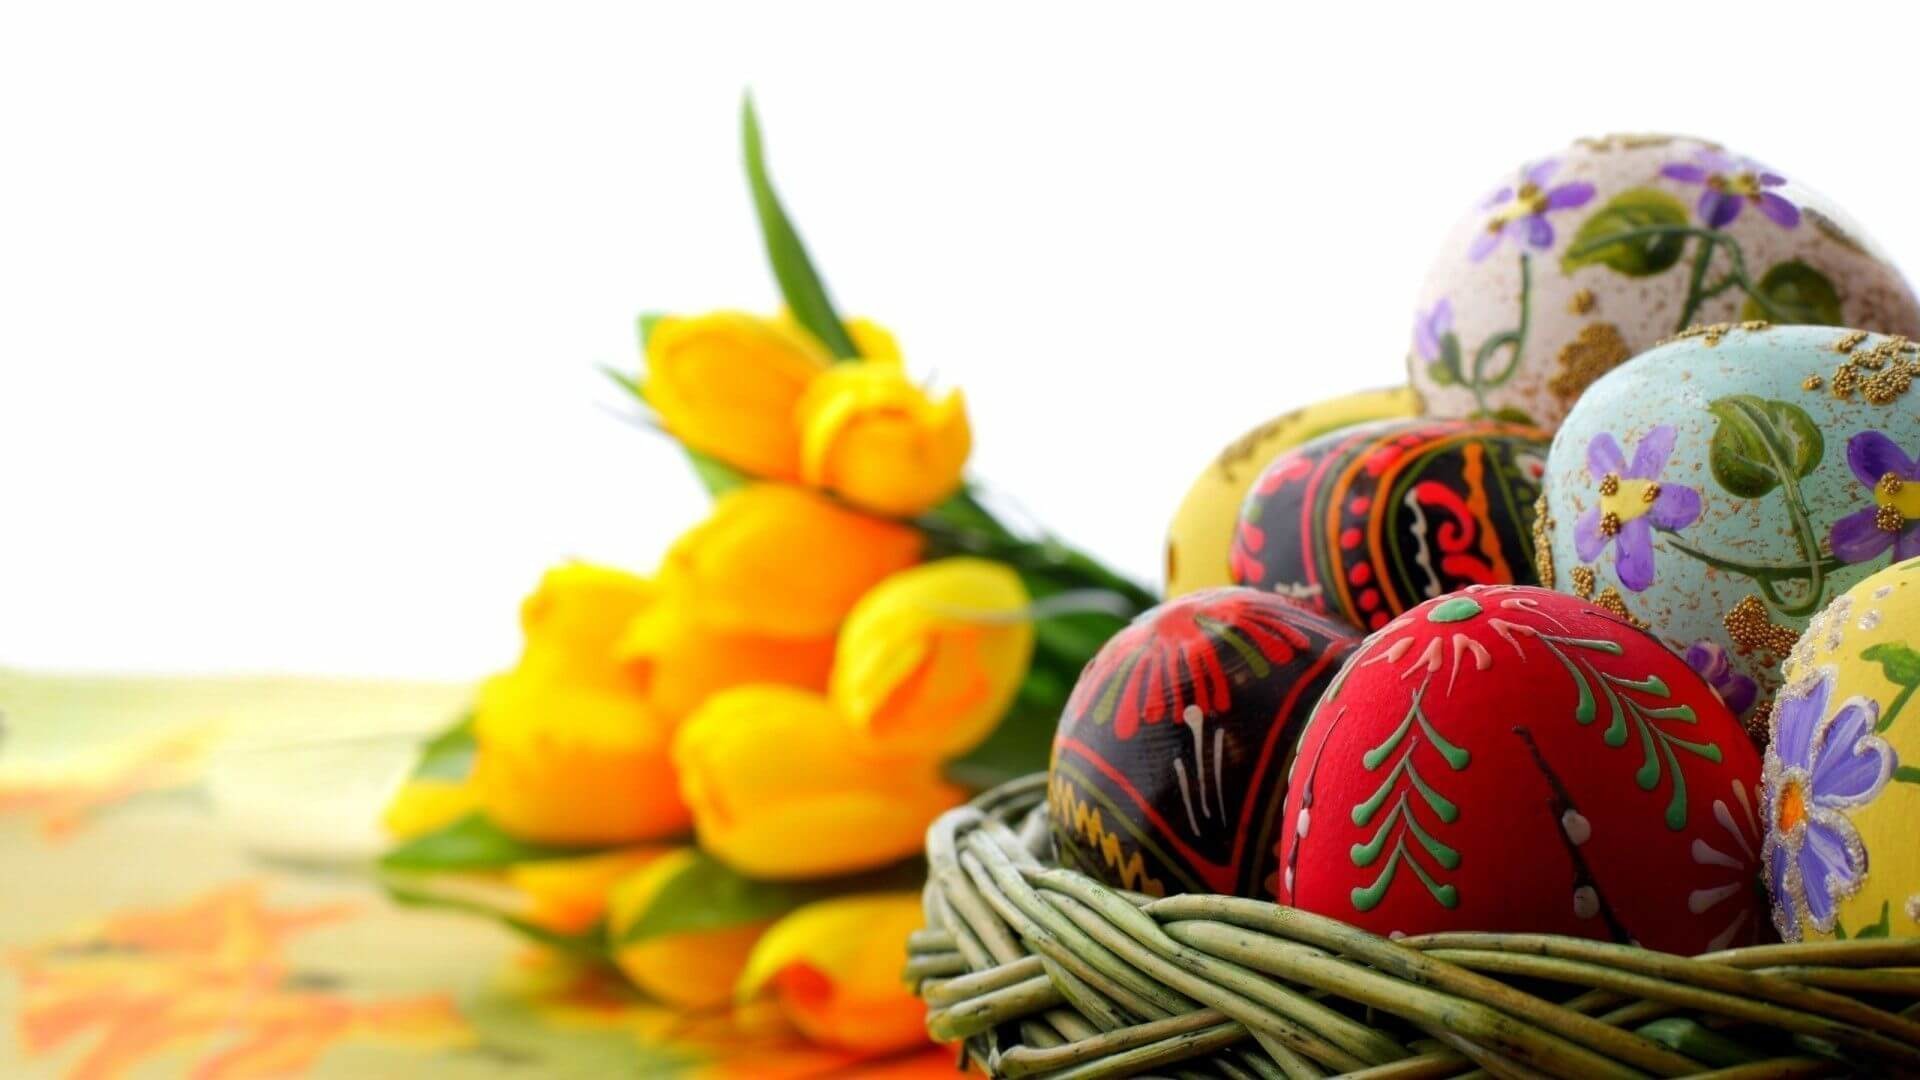 1920x1080 Cute Easter eggs in basket with yellow tulips HD desktop backgrounds